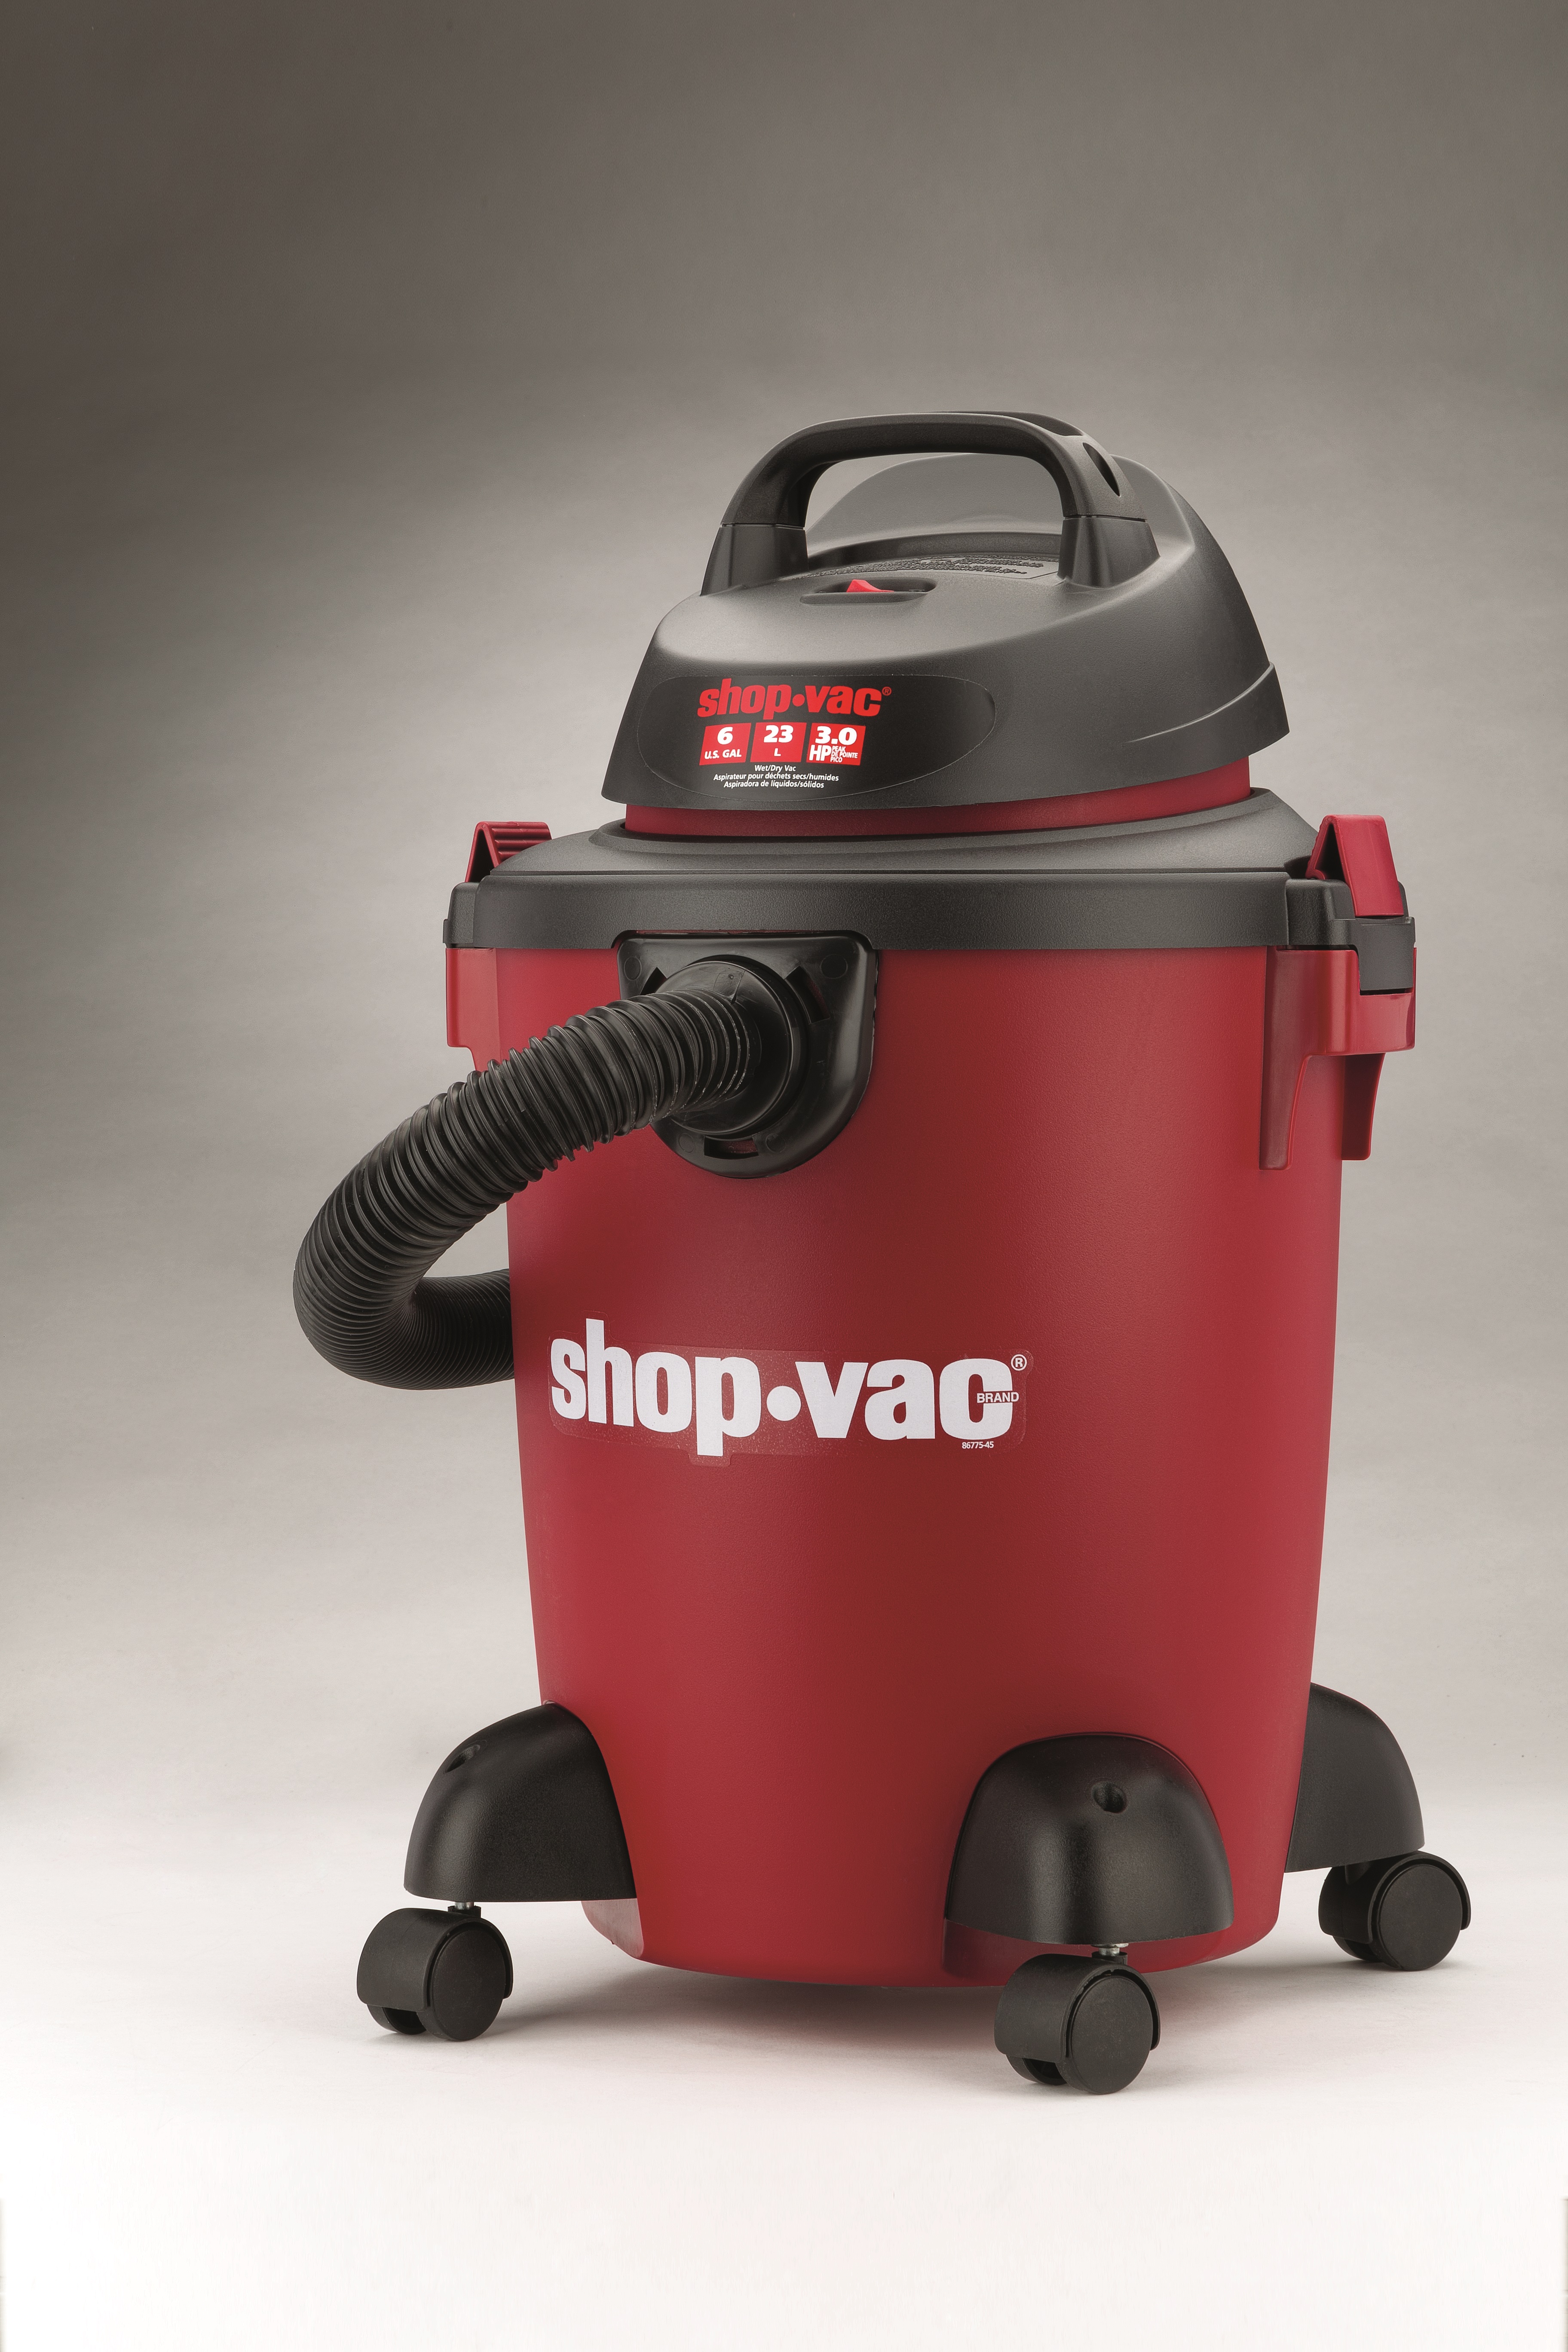 Shop-Vac 6 Gallon 3.0 Peak HP Wet / Dry Vacuum with Accessories and Casters  